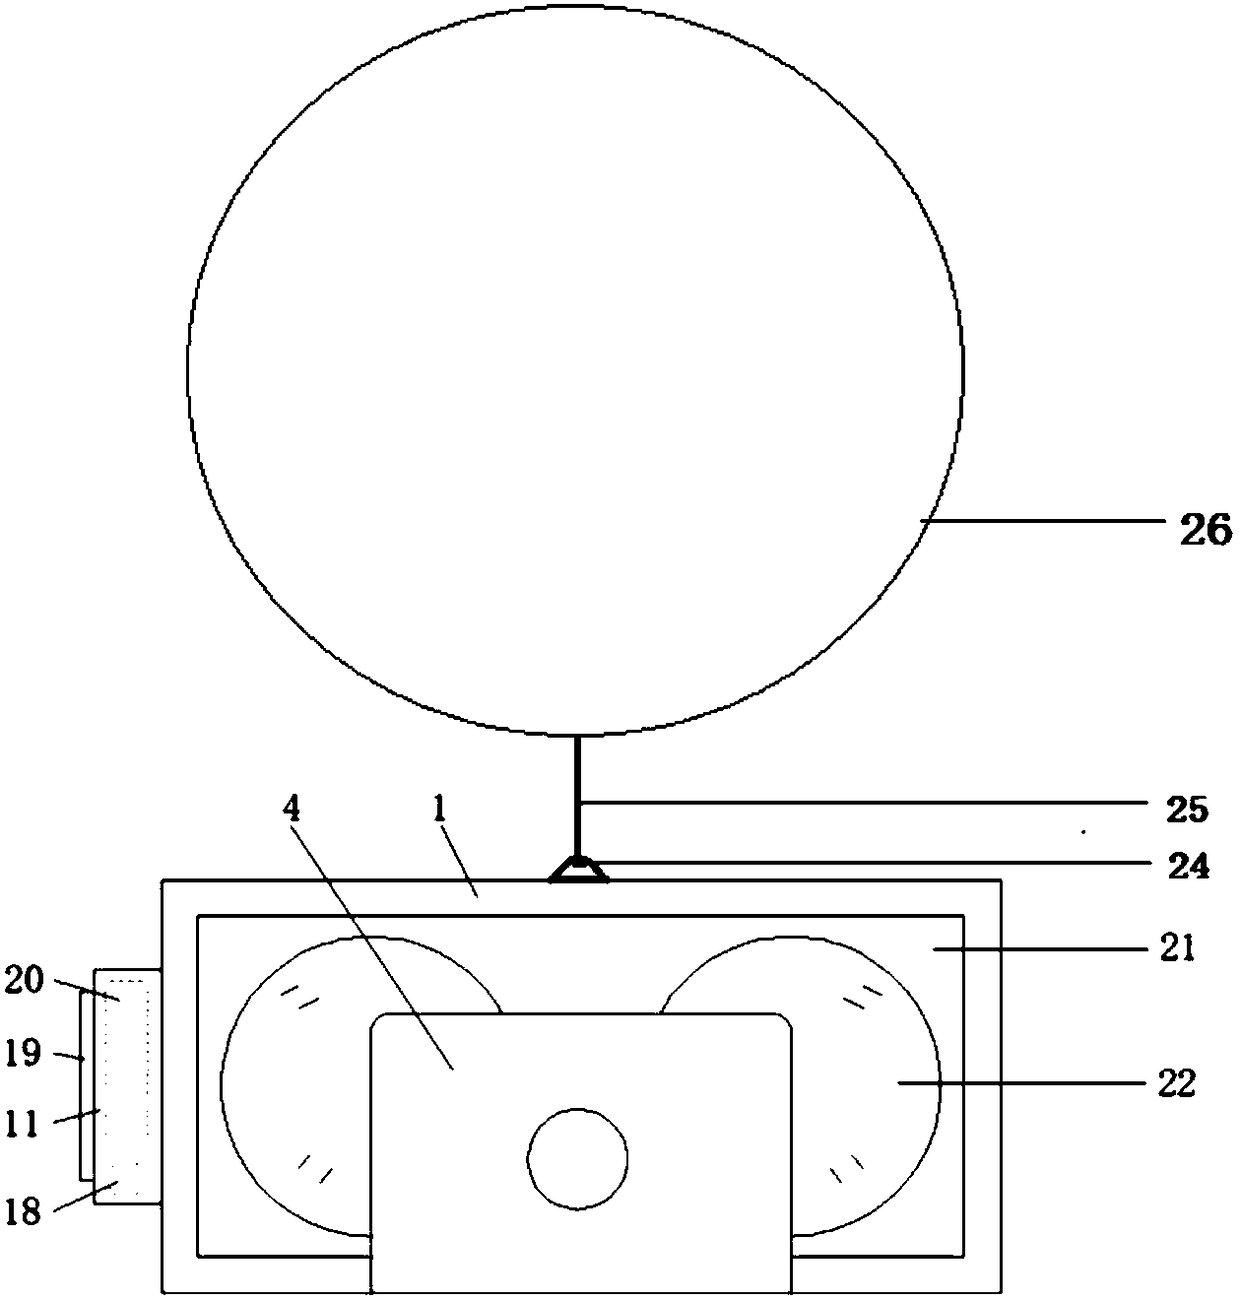 Optical device for virtual reality